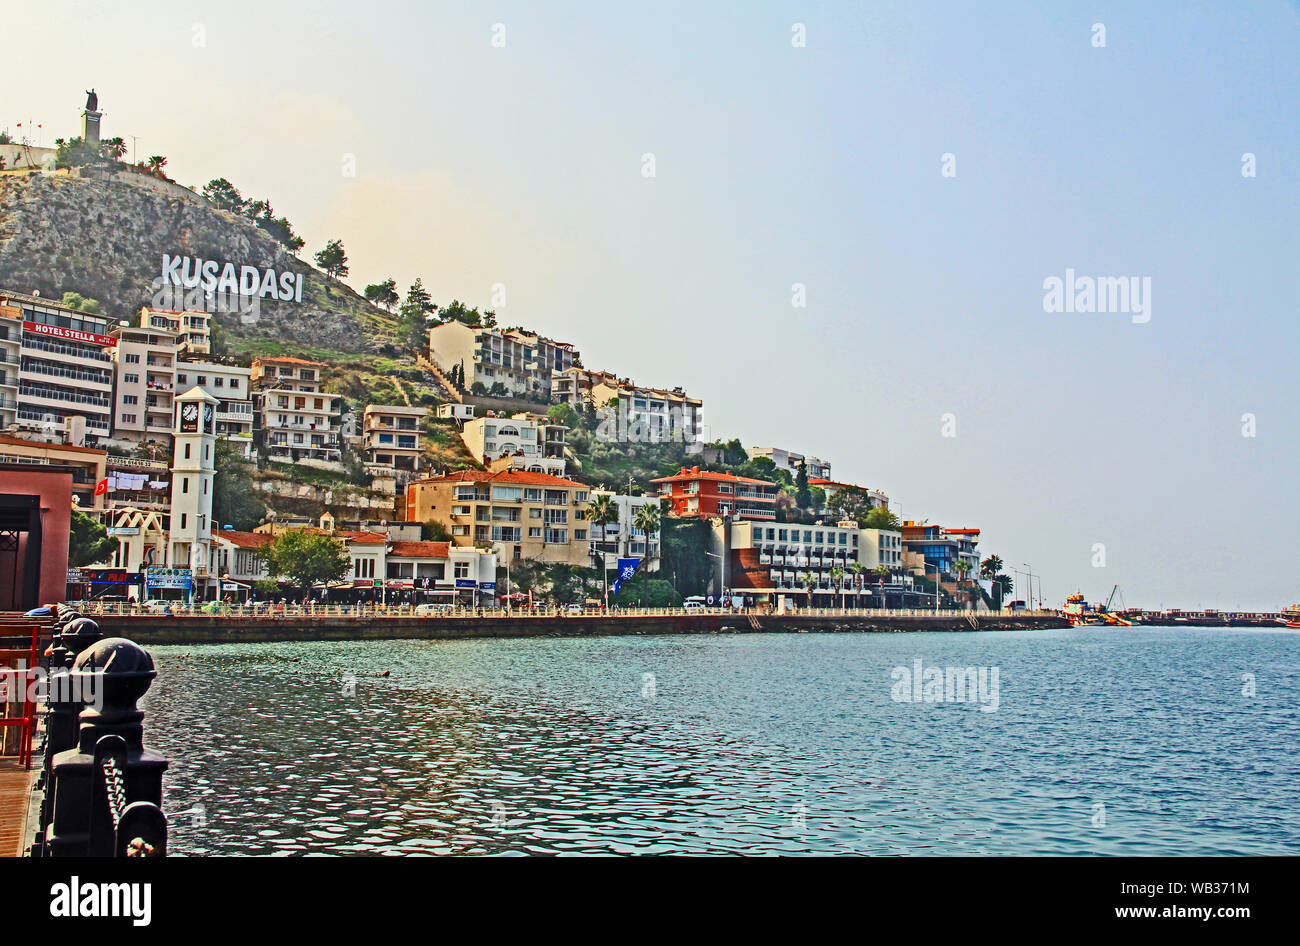 Kusadasi Sign on a Hillside Above Colorful City Buildings Stock Photo